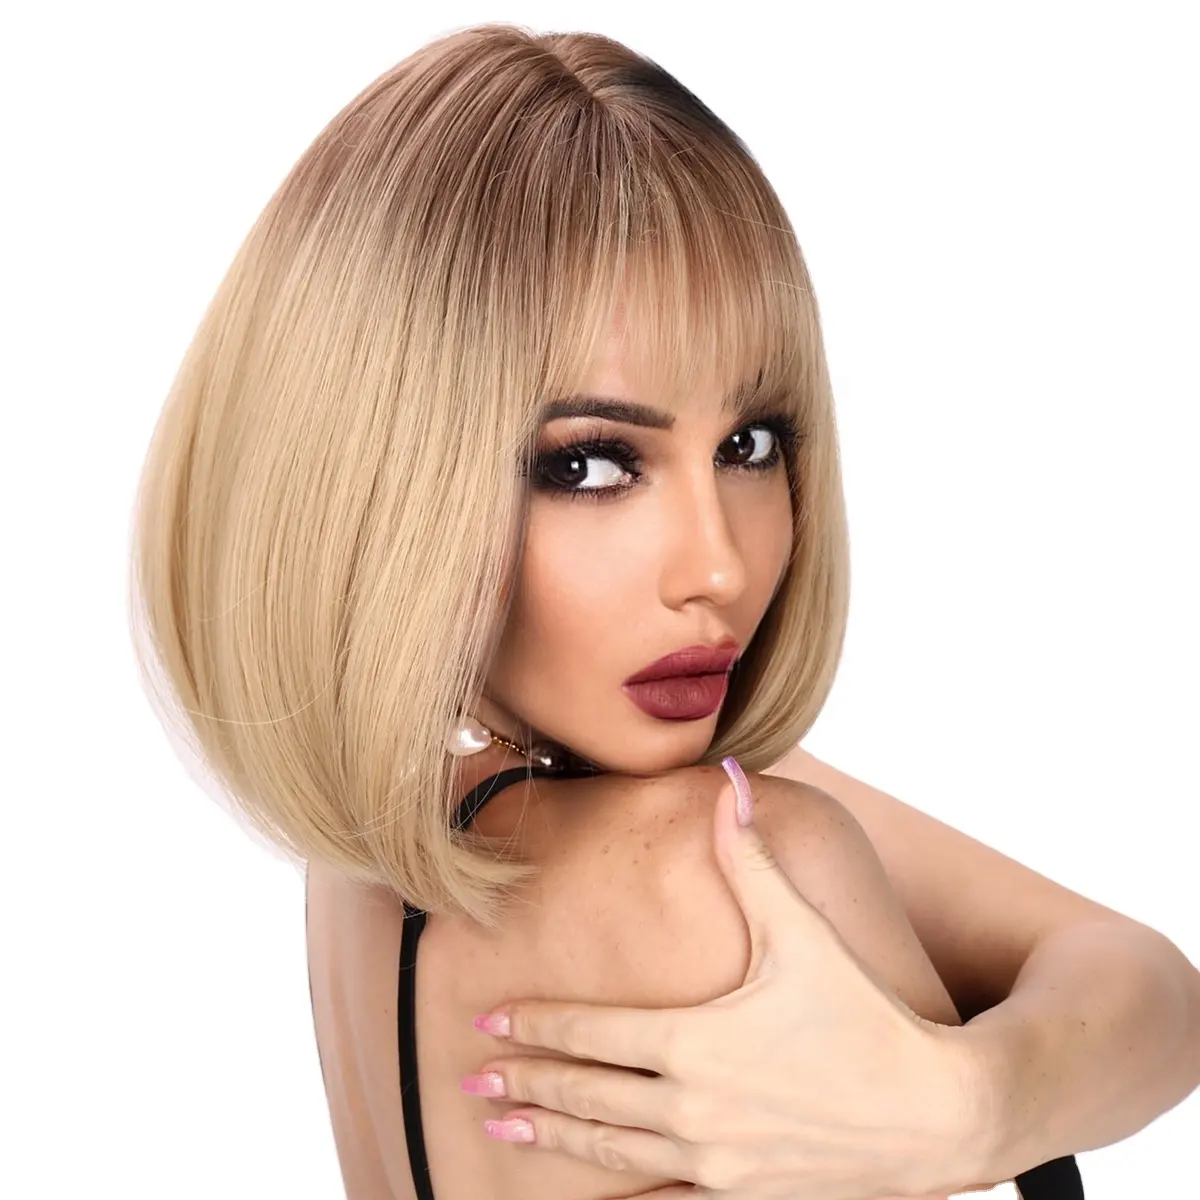 SMILCO Popular fashion wigs in Europe and America, light brown short hair and bangs wig Party supplies